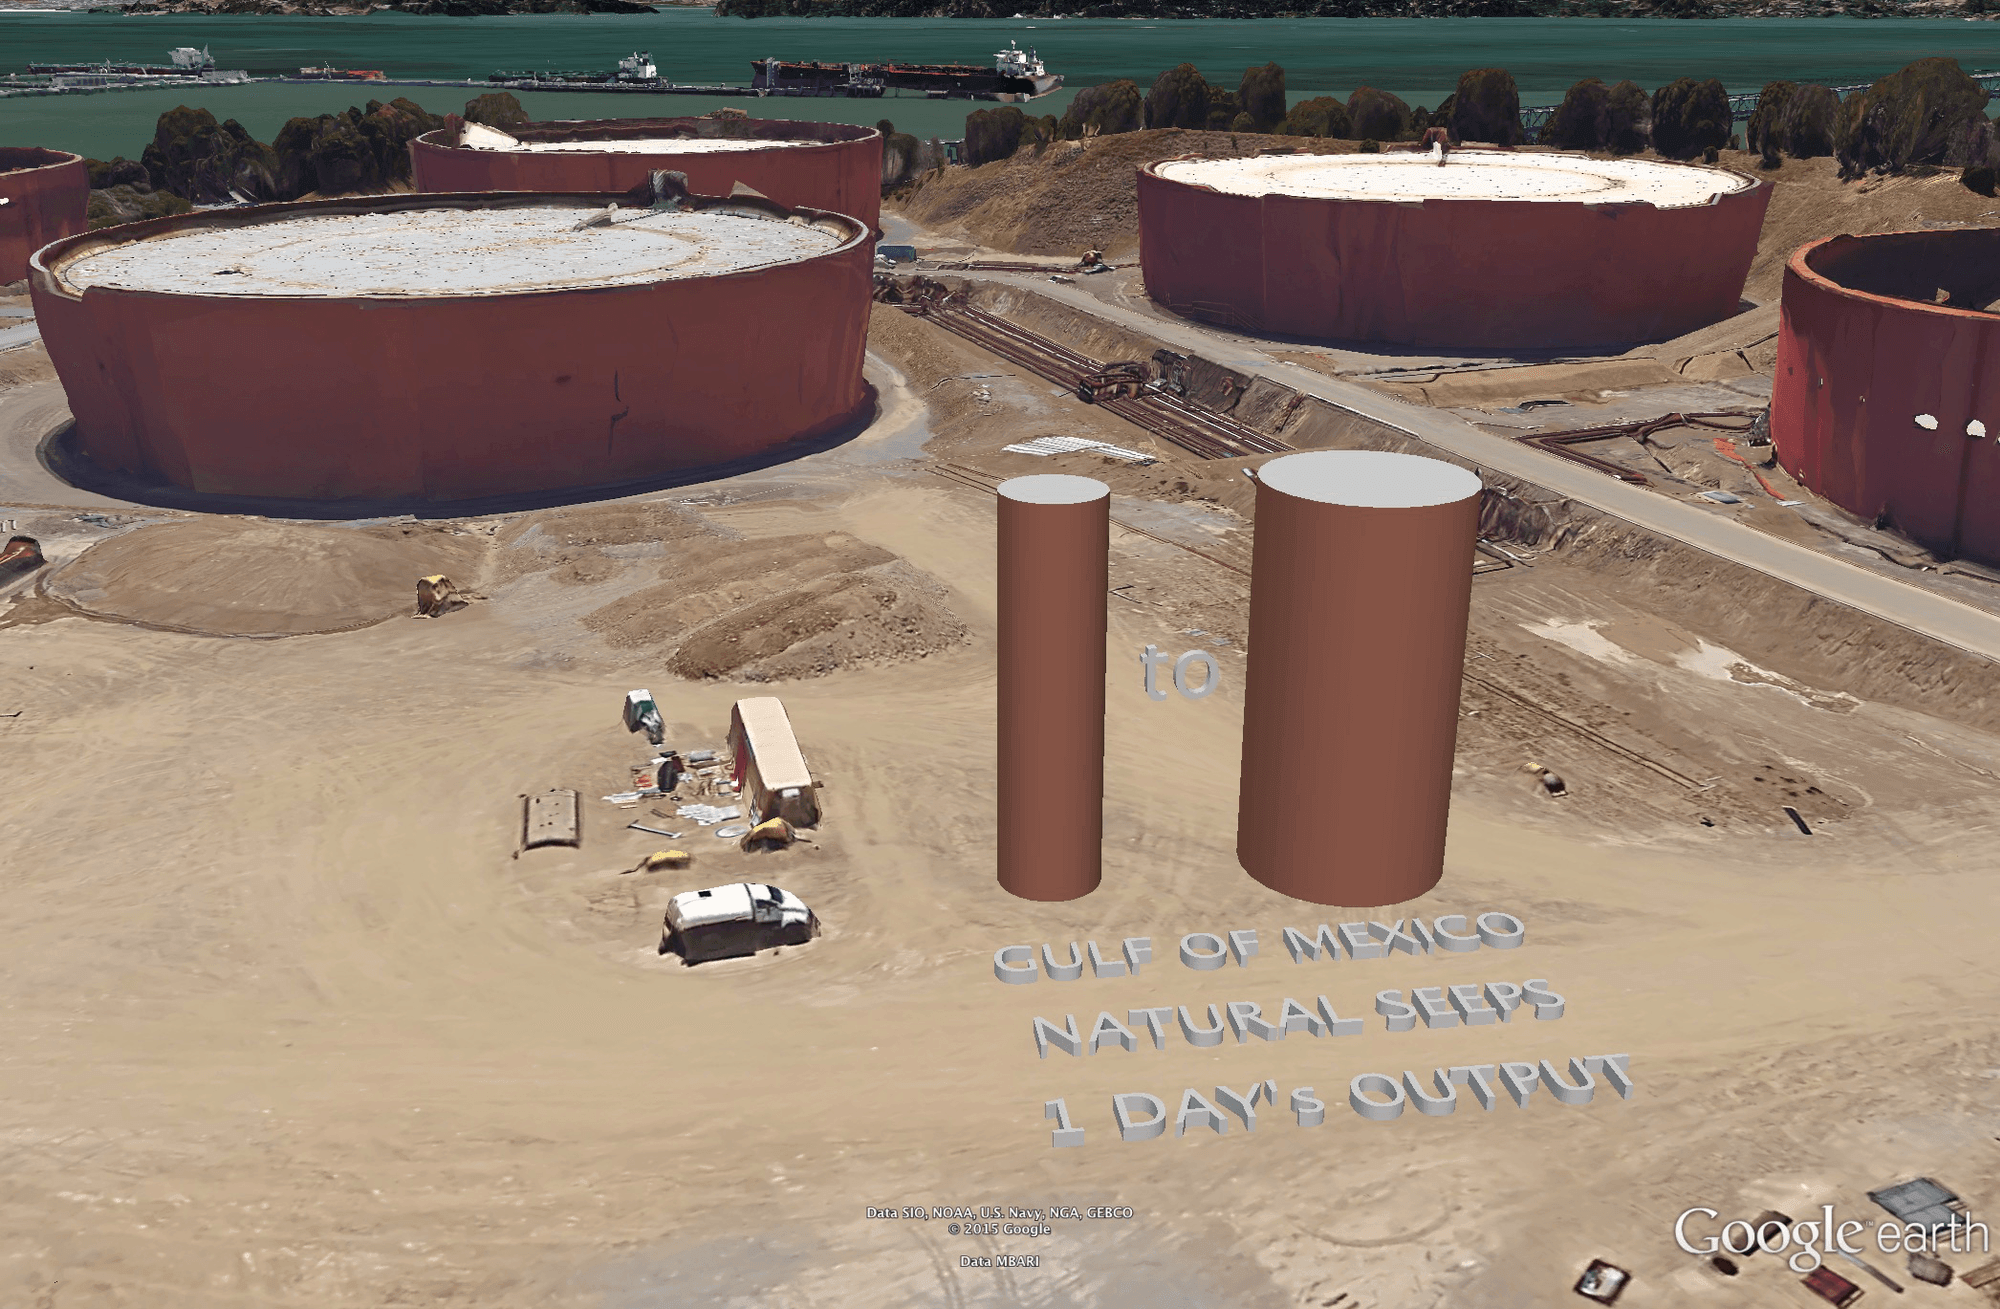 One day's output from all 20,000 natural oil seeps in the entire Gulf of Mexico (2500 to 10,000 barrels) would fill a hypothetical tank 19.6m (64 ft) high and 5 to 10 meters (16 to 32 ft) in diameter. *The large tanks in the background hold 750,000 barrels and would comfortably fit a 747 inside.